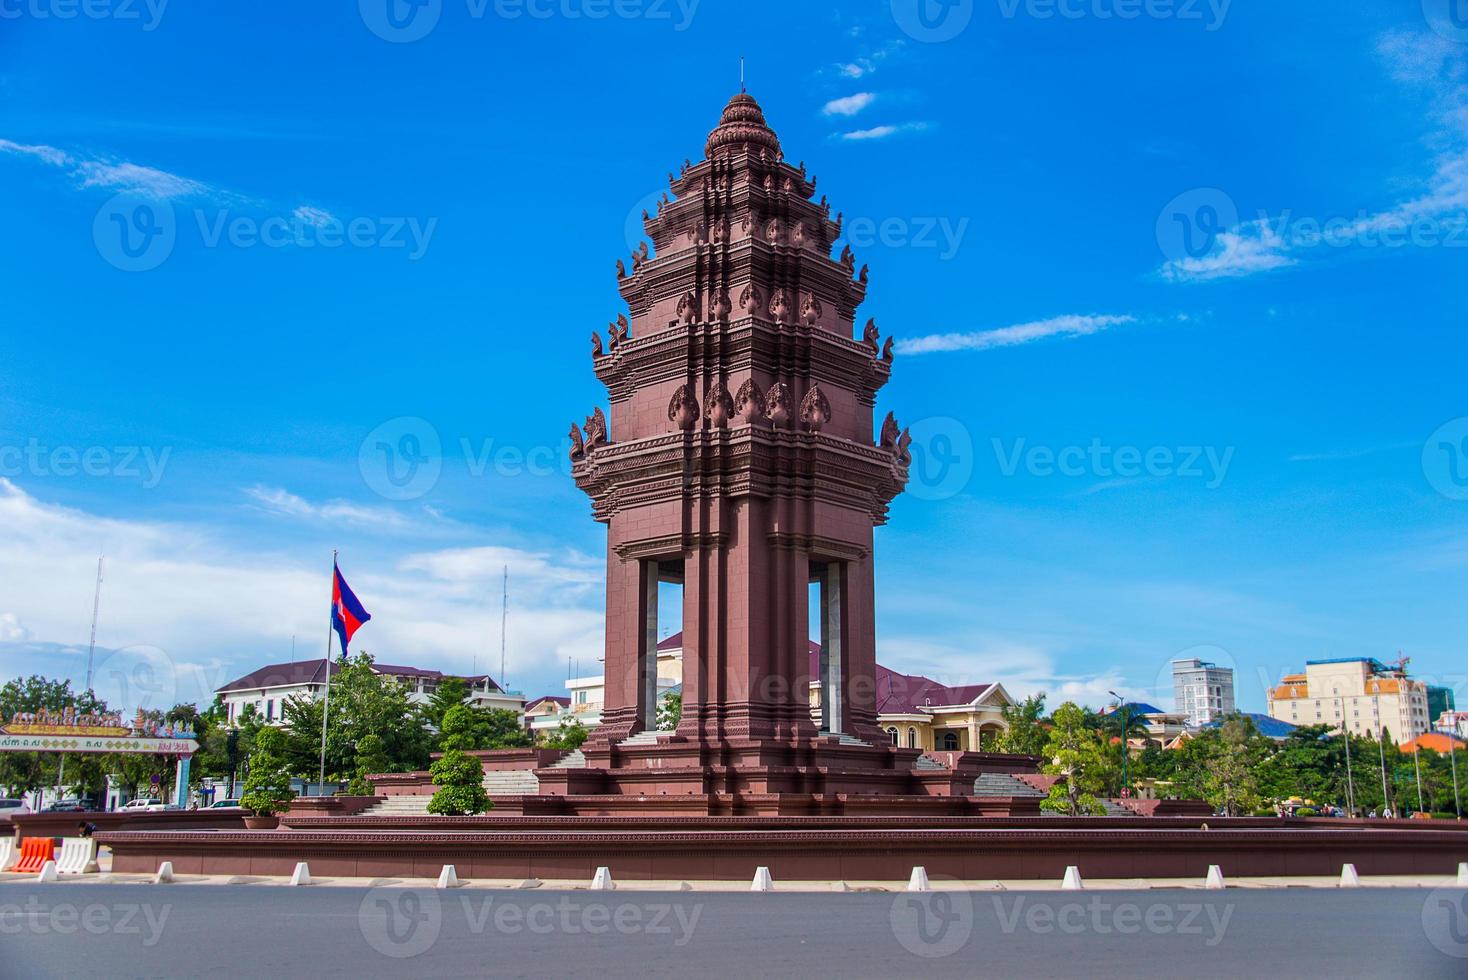 The Independence monument with  Khmer architectural style, in Phnom Penh, Cambodia capital city photo